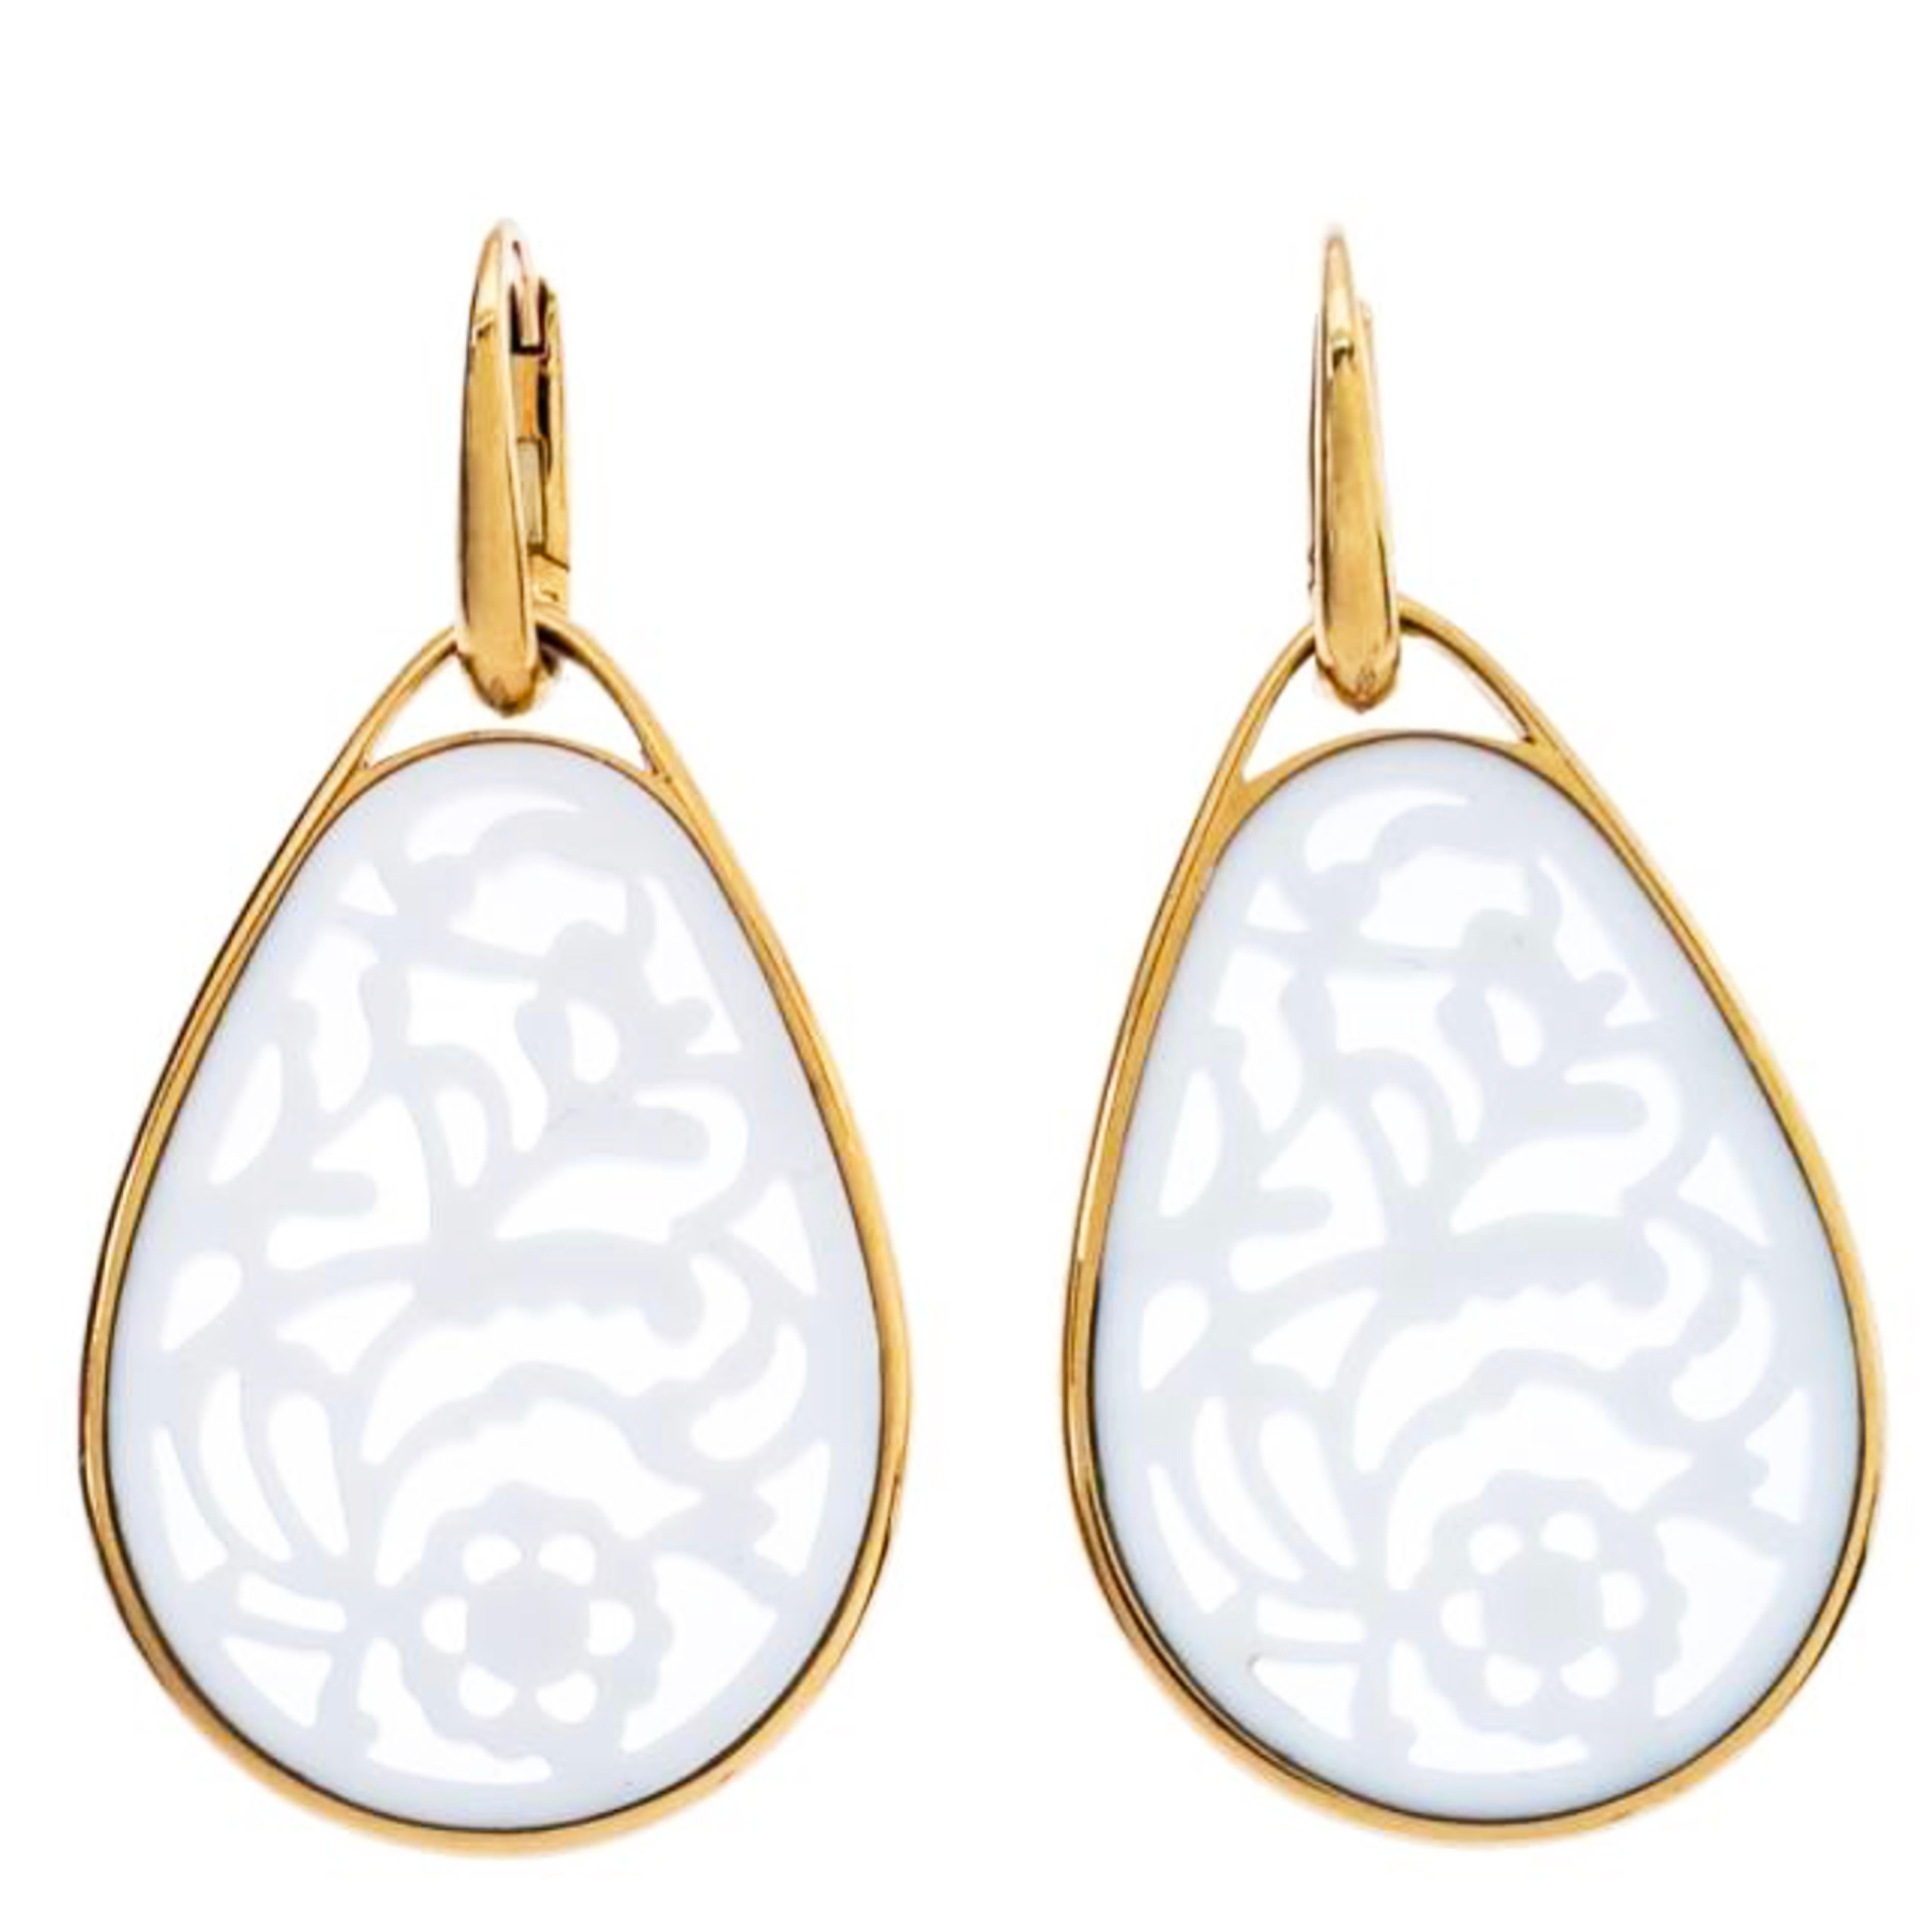 Contemporary Pomellato 18kt Rose Gold Victoria Collection White Agate Drop Earrings